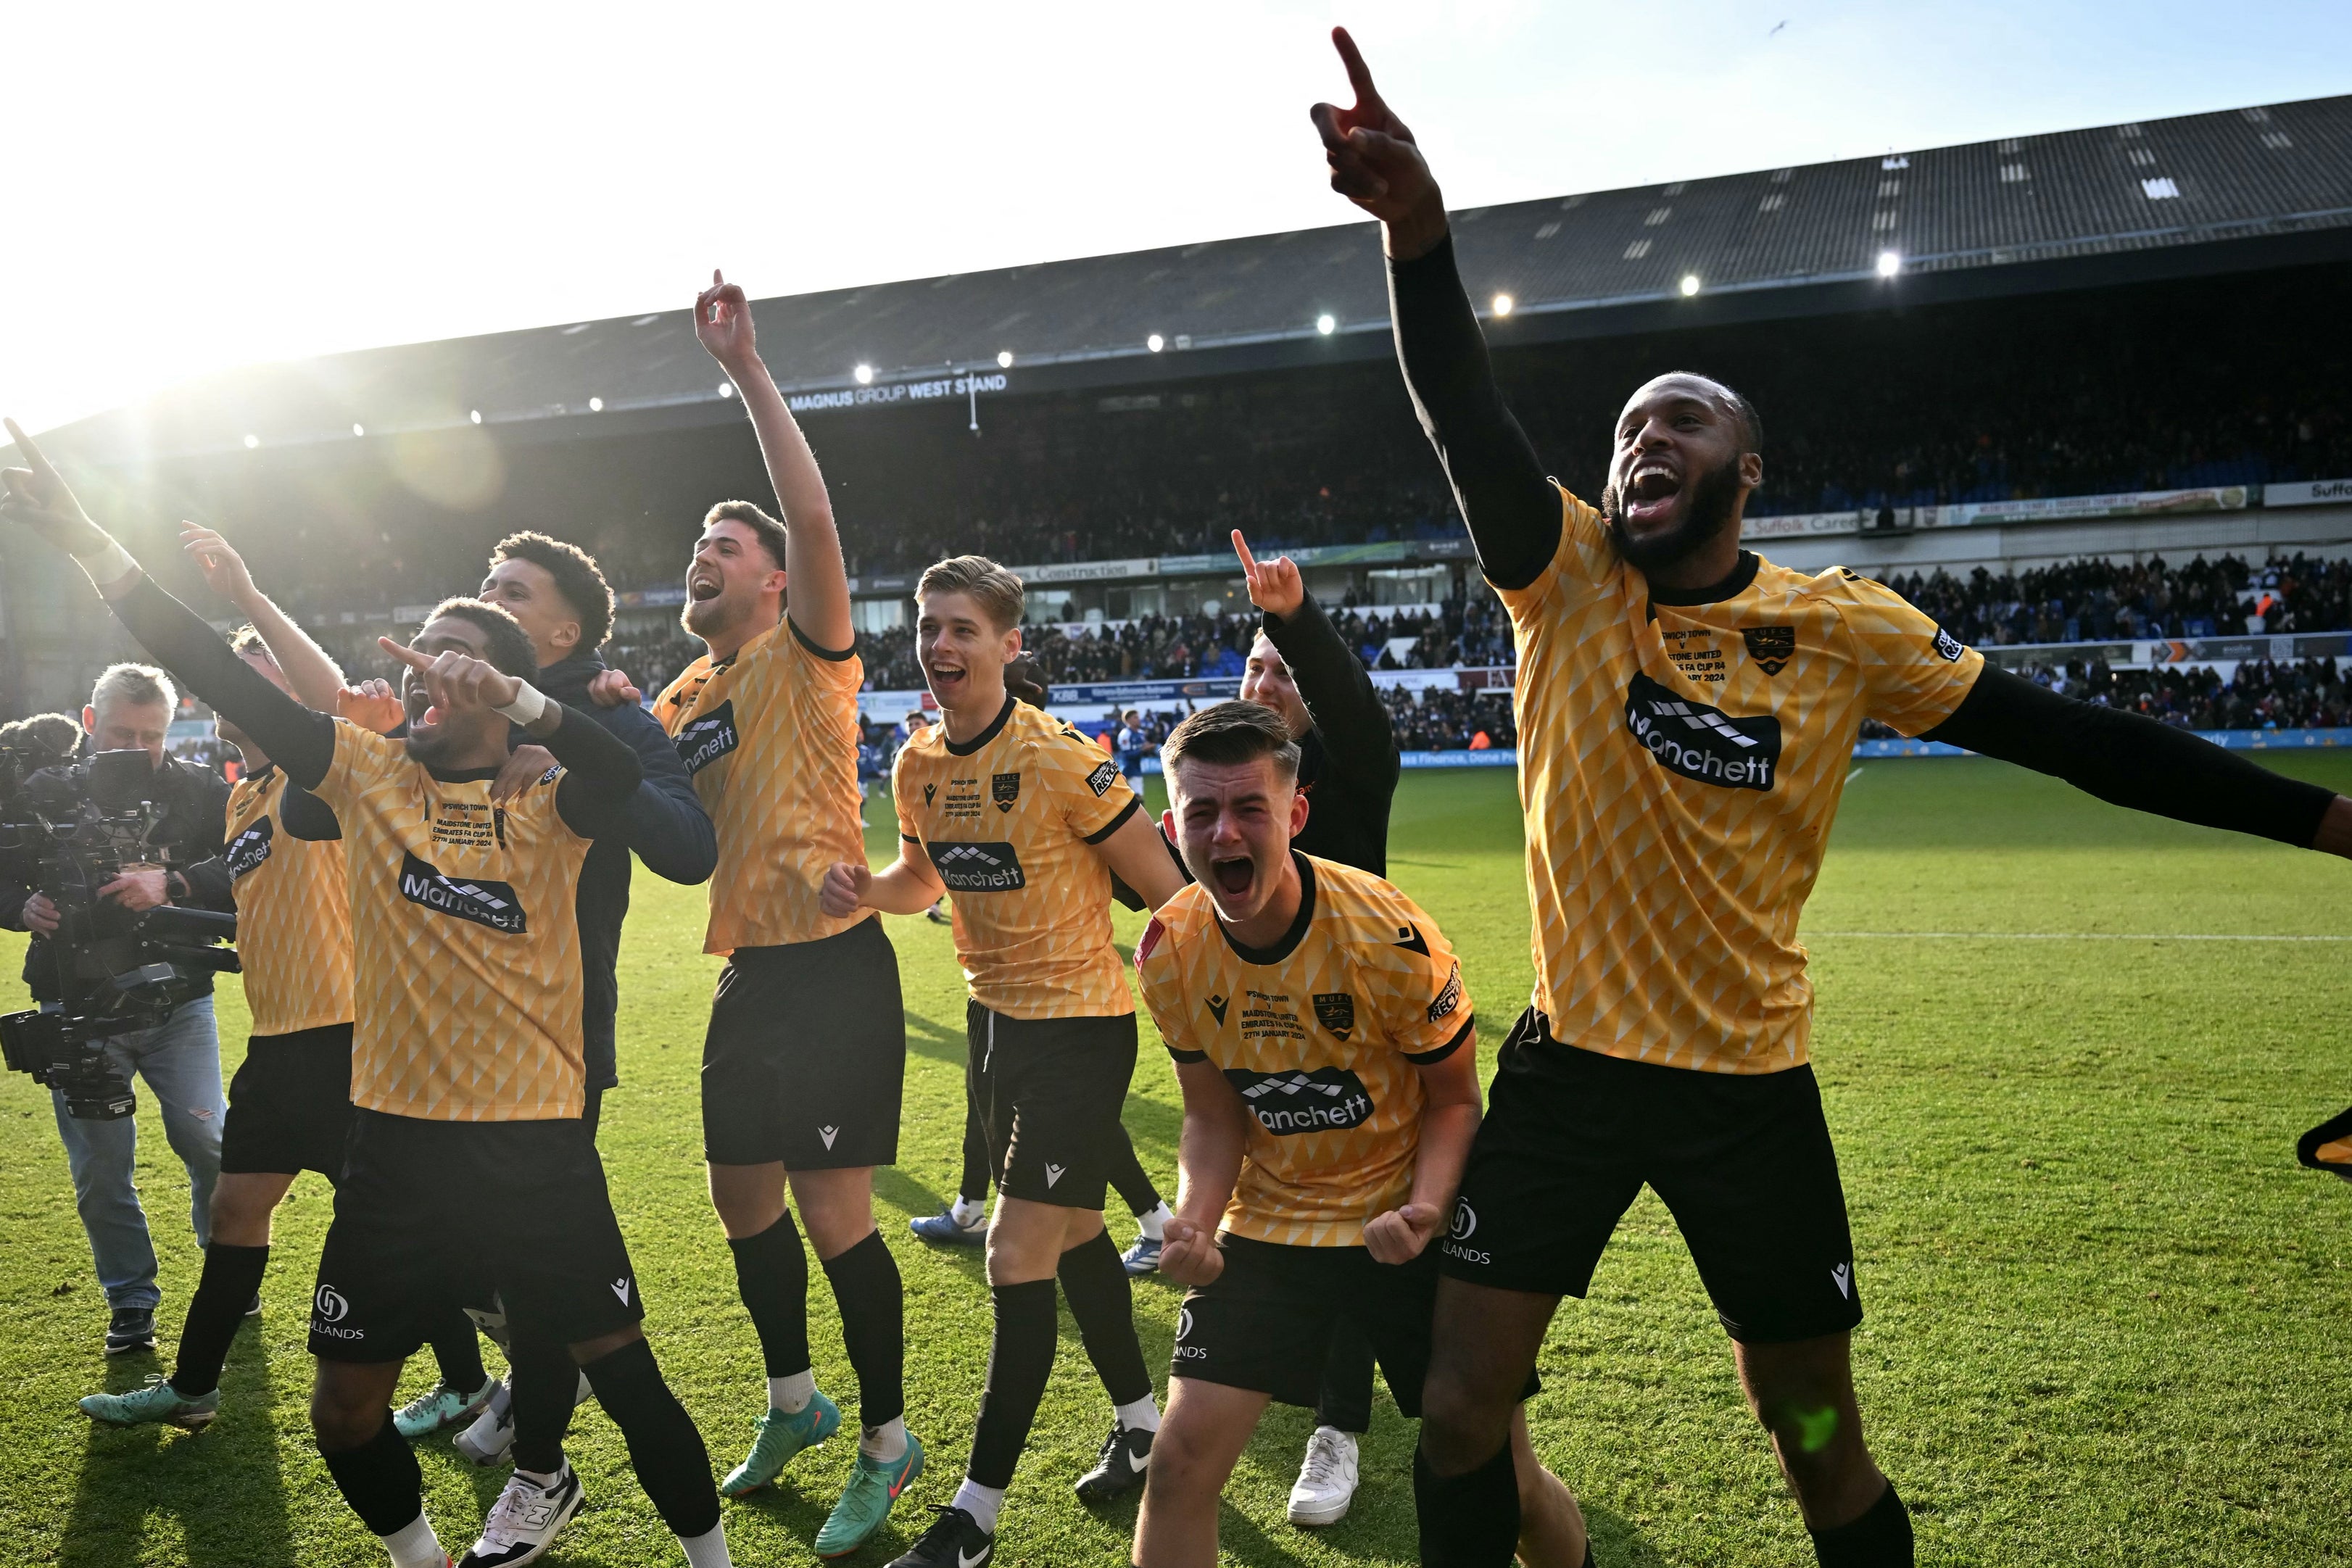 Maidstone stunned Ipswich in the FA Cup fourth round